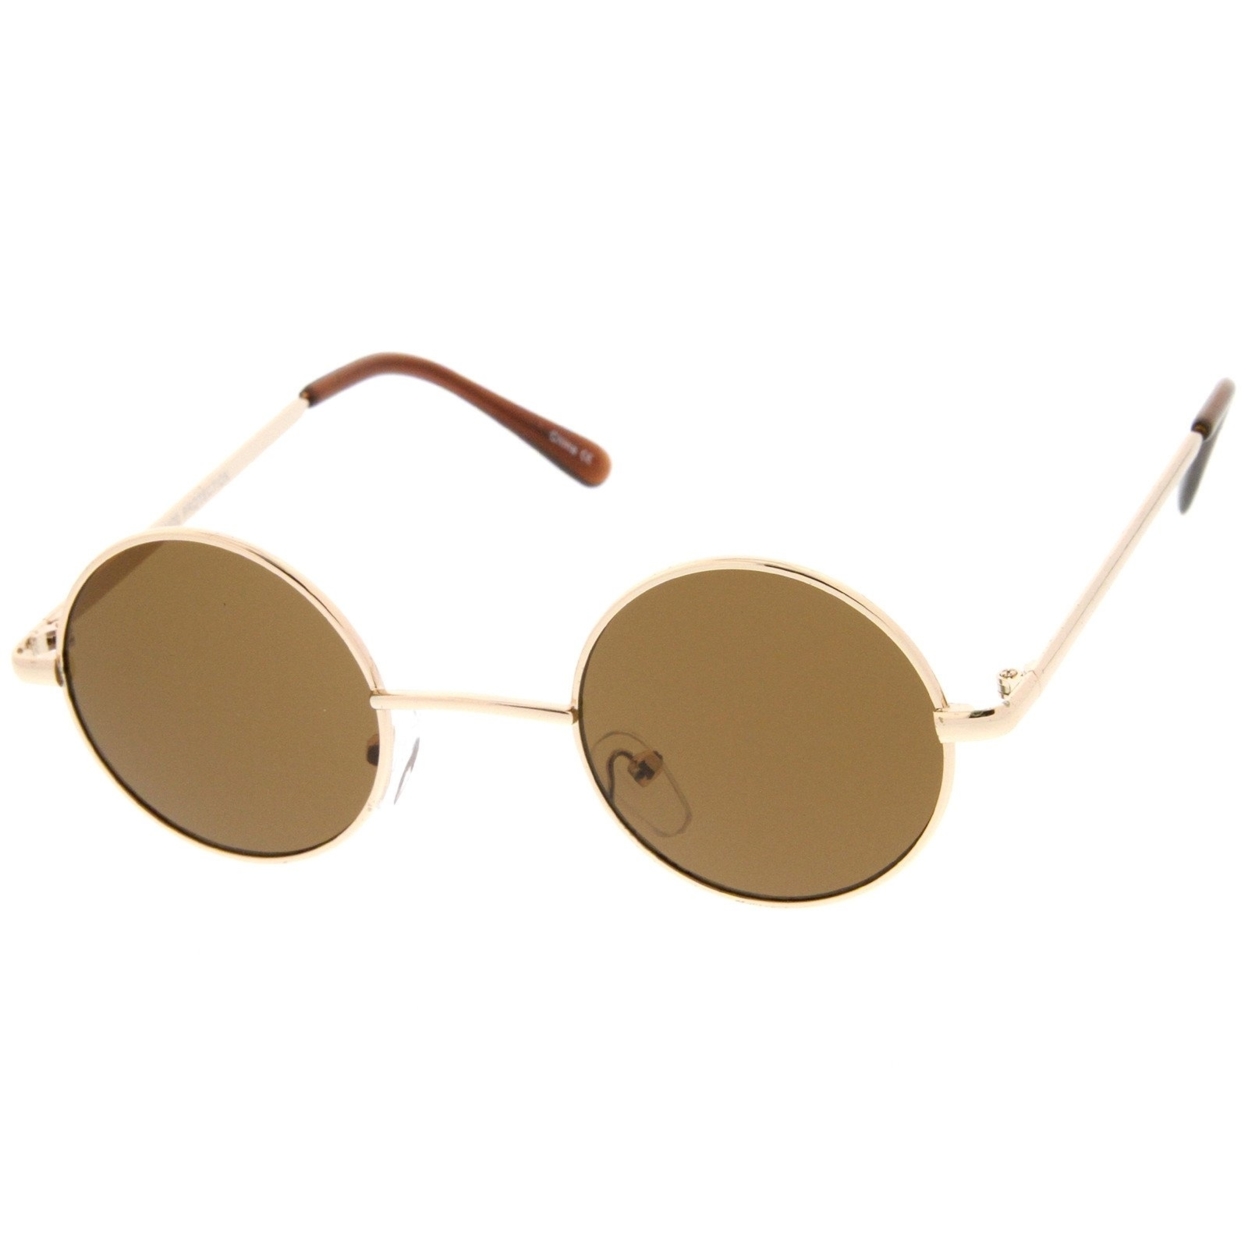 Small Retro Lennon Inspired Style Neutral-Colored Lens Round Metal Sunglasses 41mm - Gold / Brown